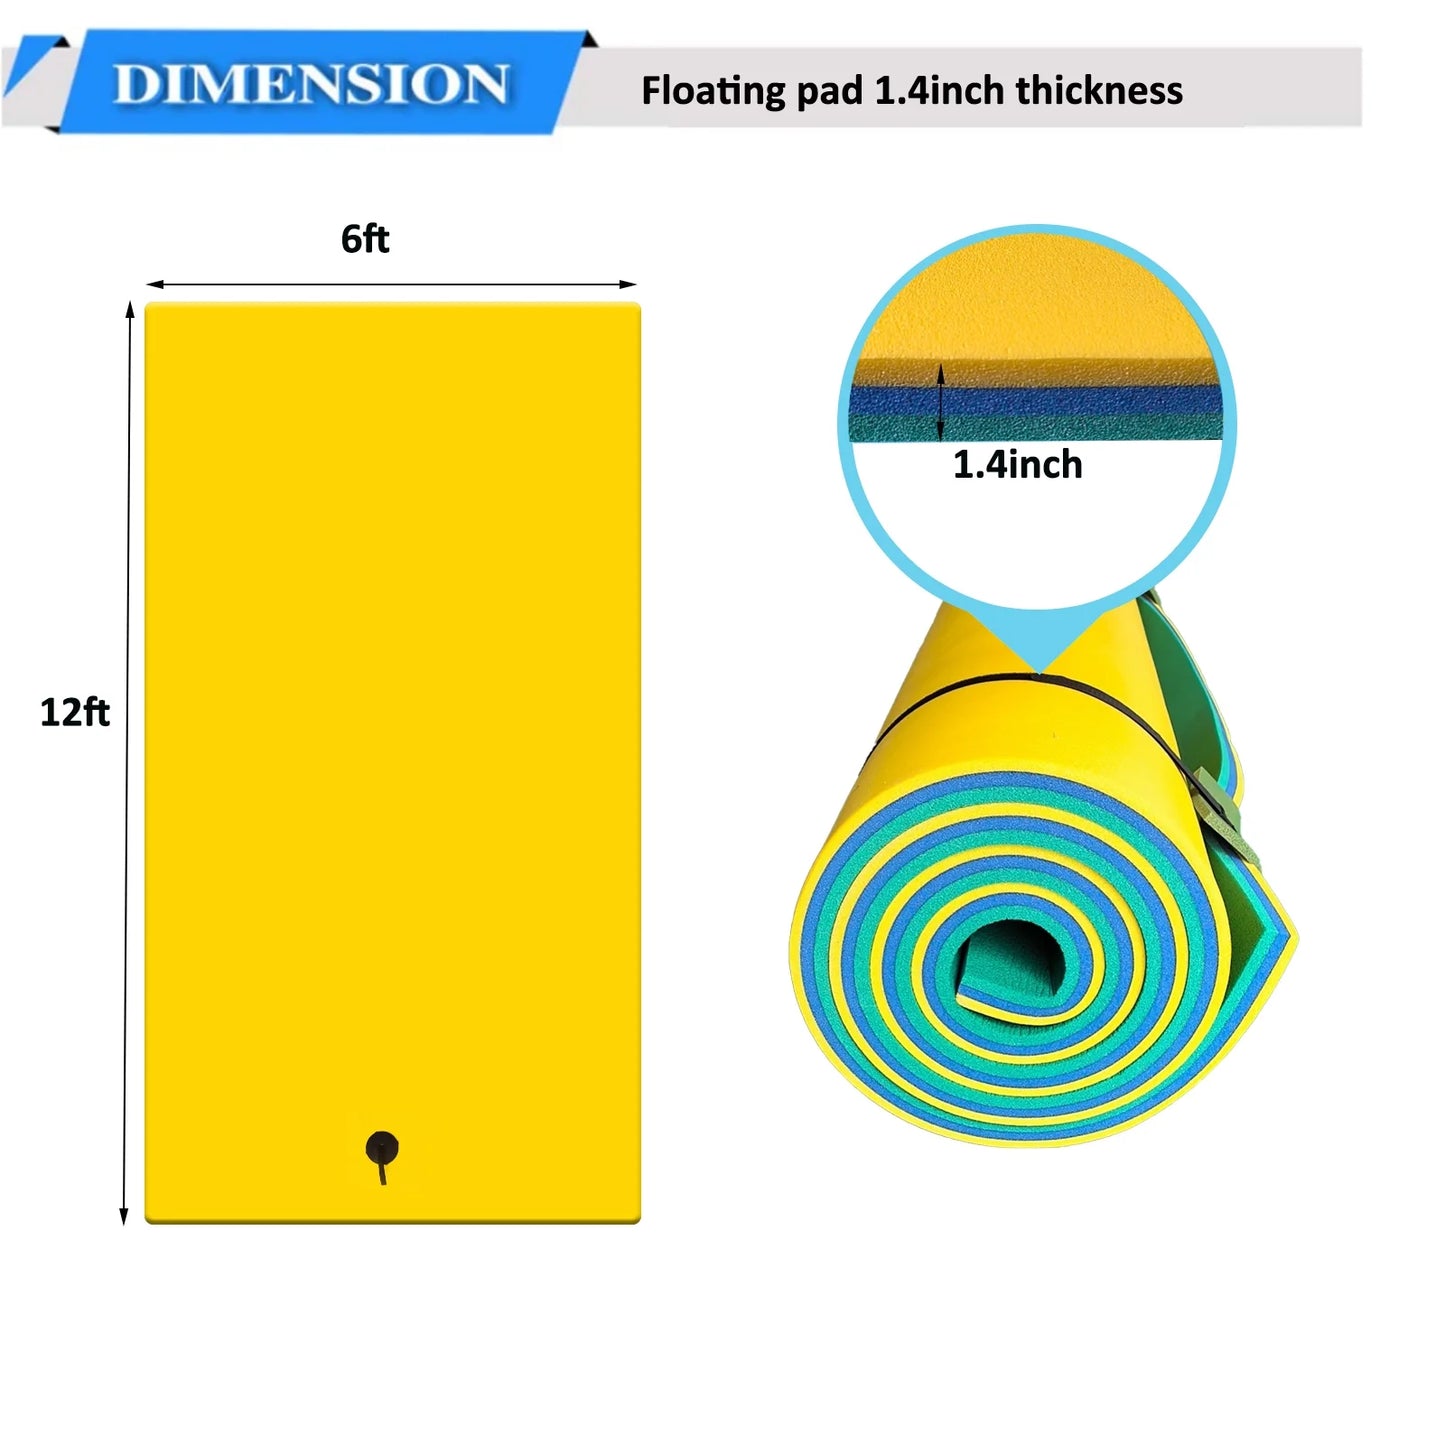 12' × 6' Lily Pad Floating Mat - Tear-Resistant 3-Layer Foam for Water Recreation - Yellow